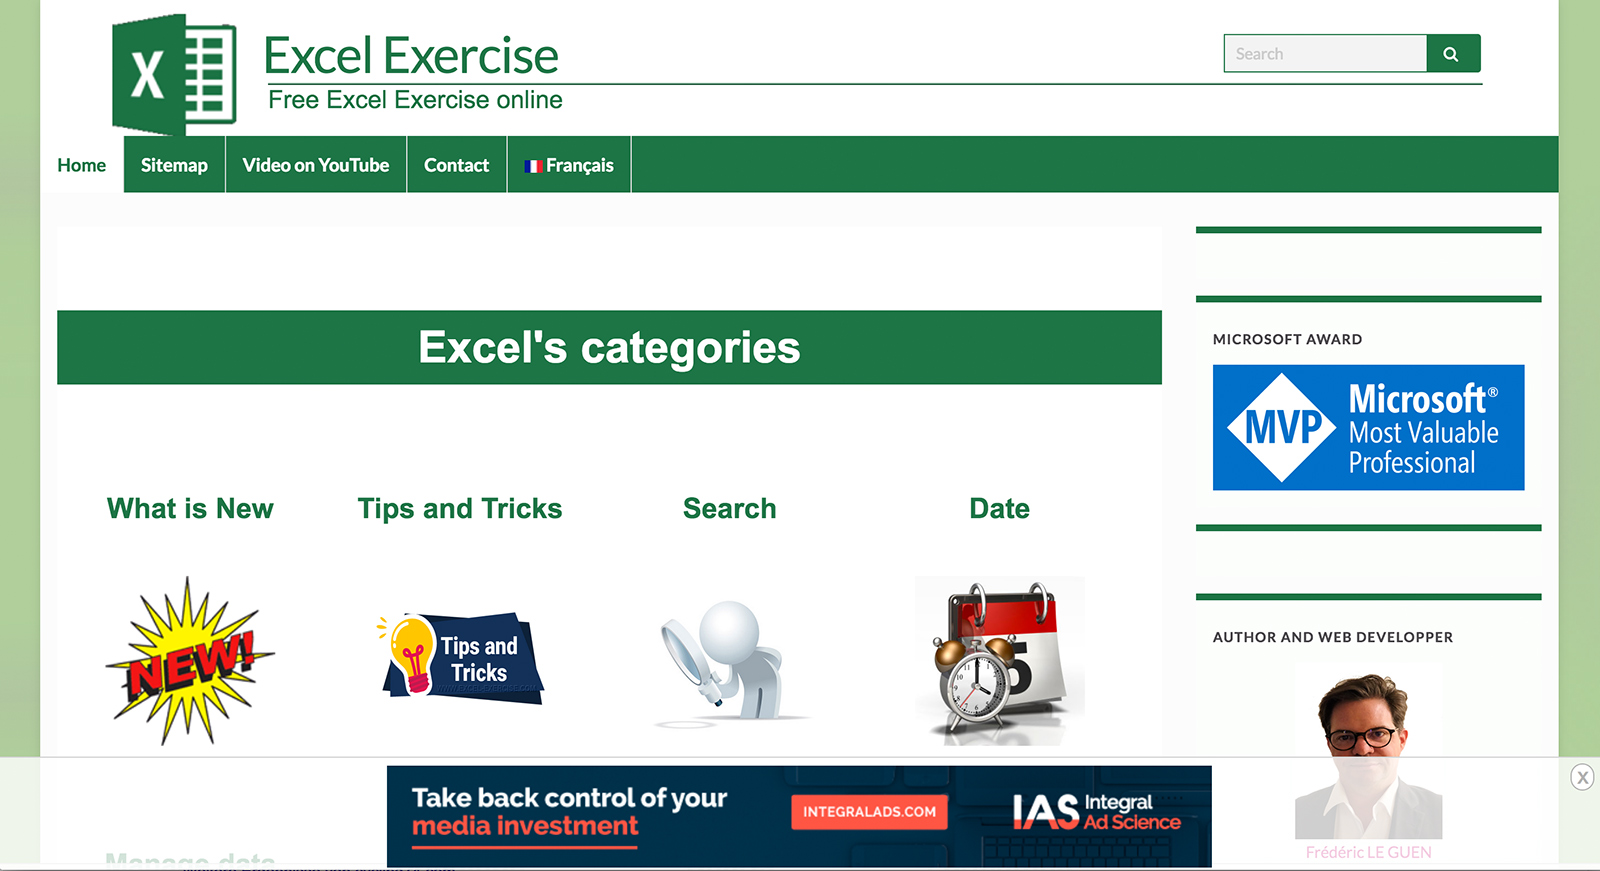 Excel-Exercise.com